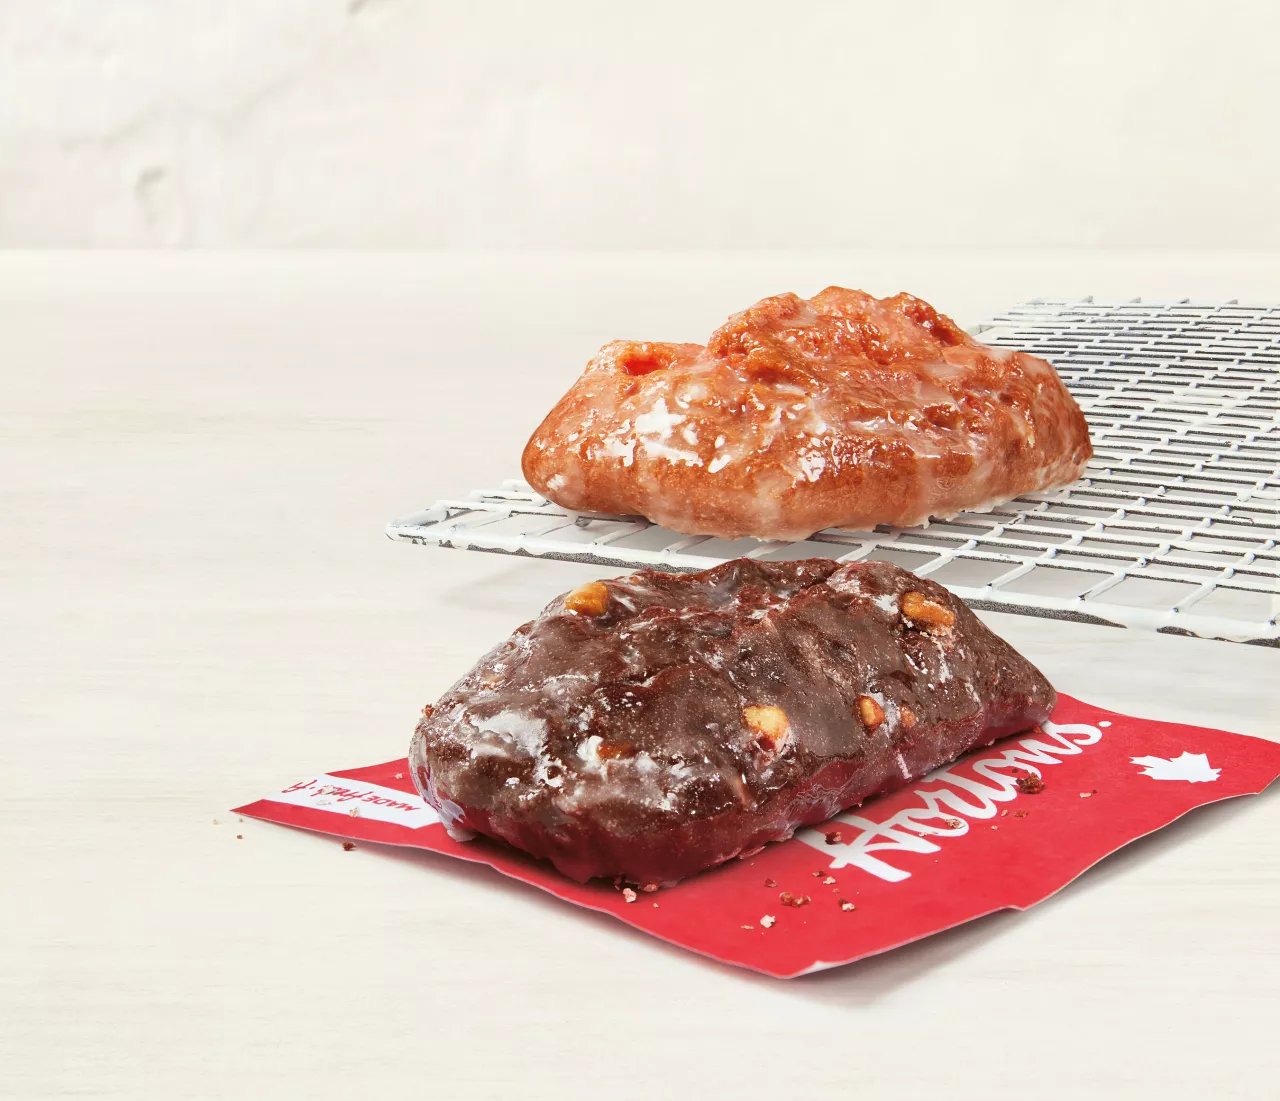 Tim Hortons is bringing back the beloved Walnut Crunch and Cherry Stick donuts for a limited time to celebrate National Donut Day! (CNW Group/Tim Hortons) img#1